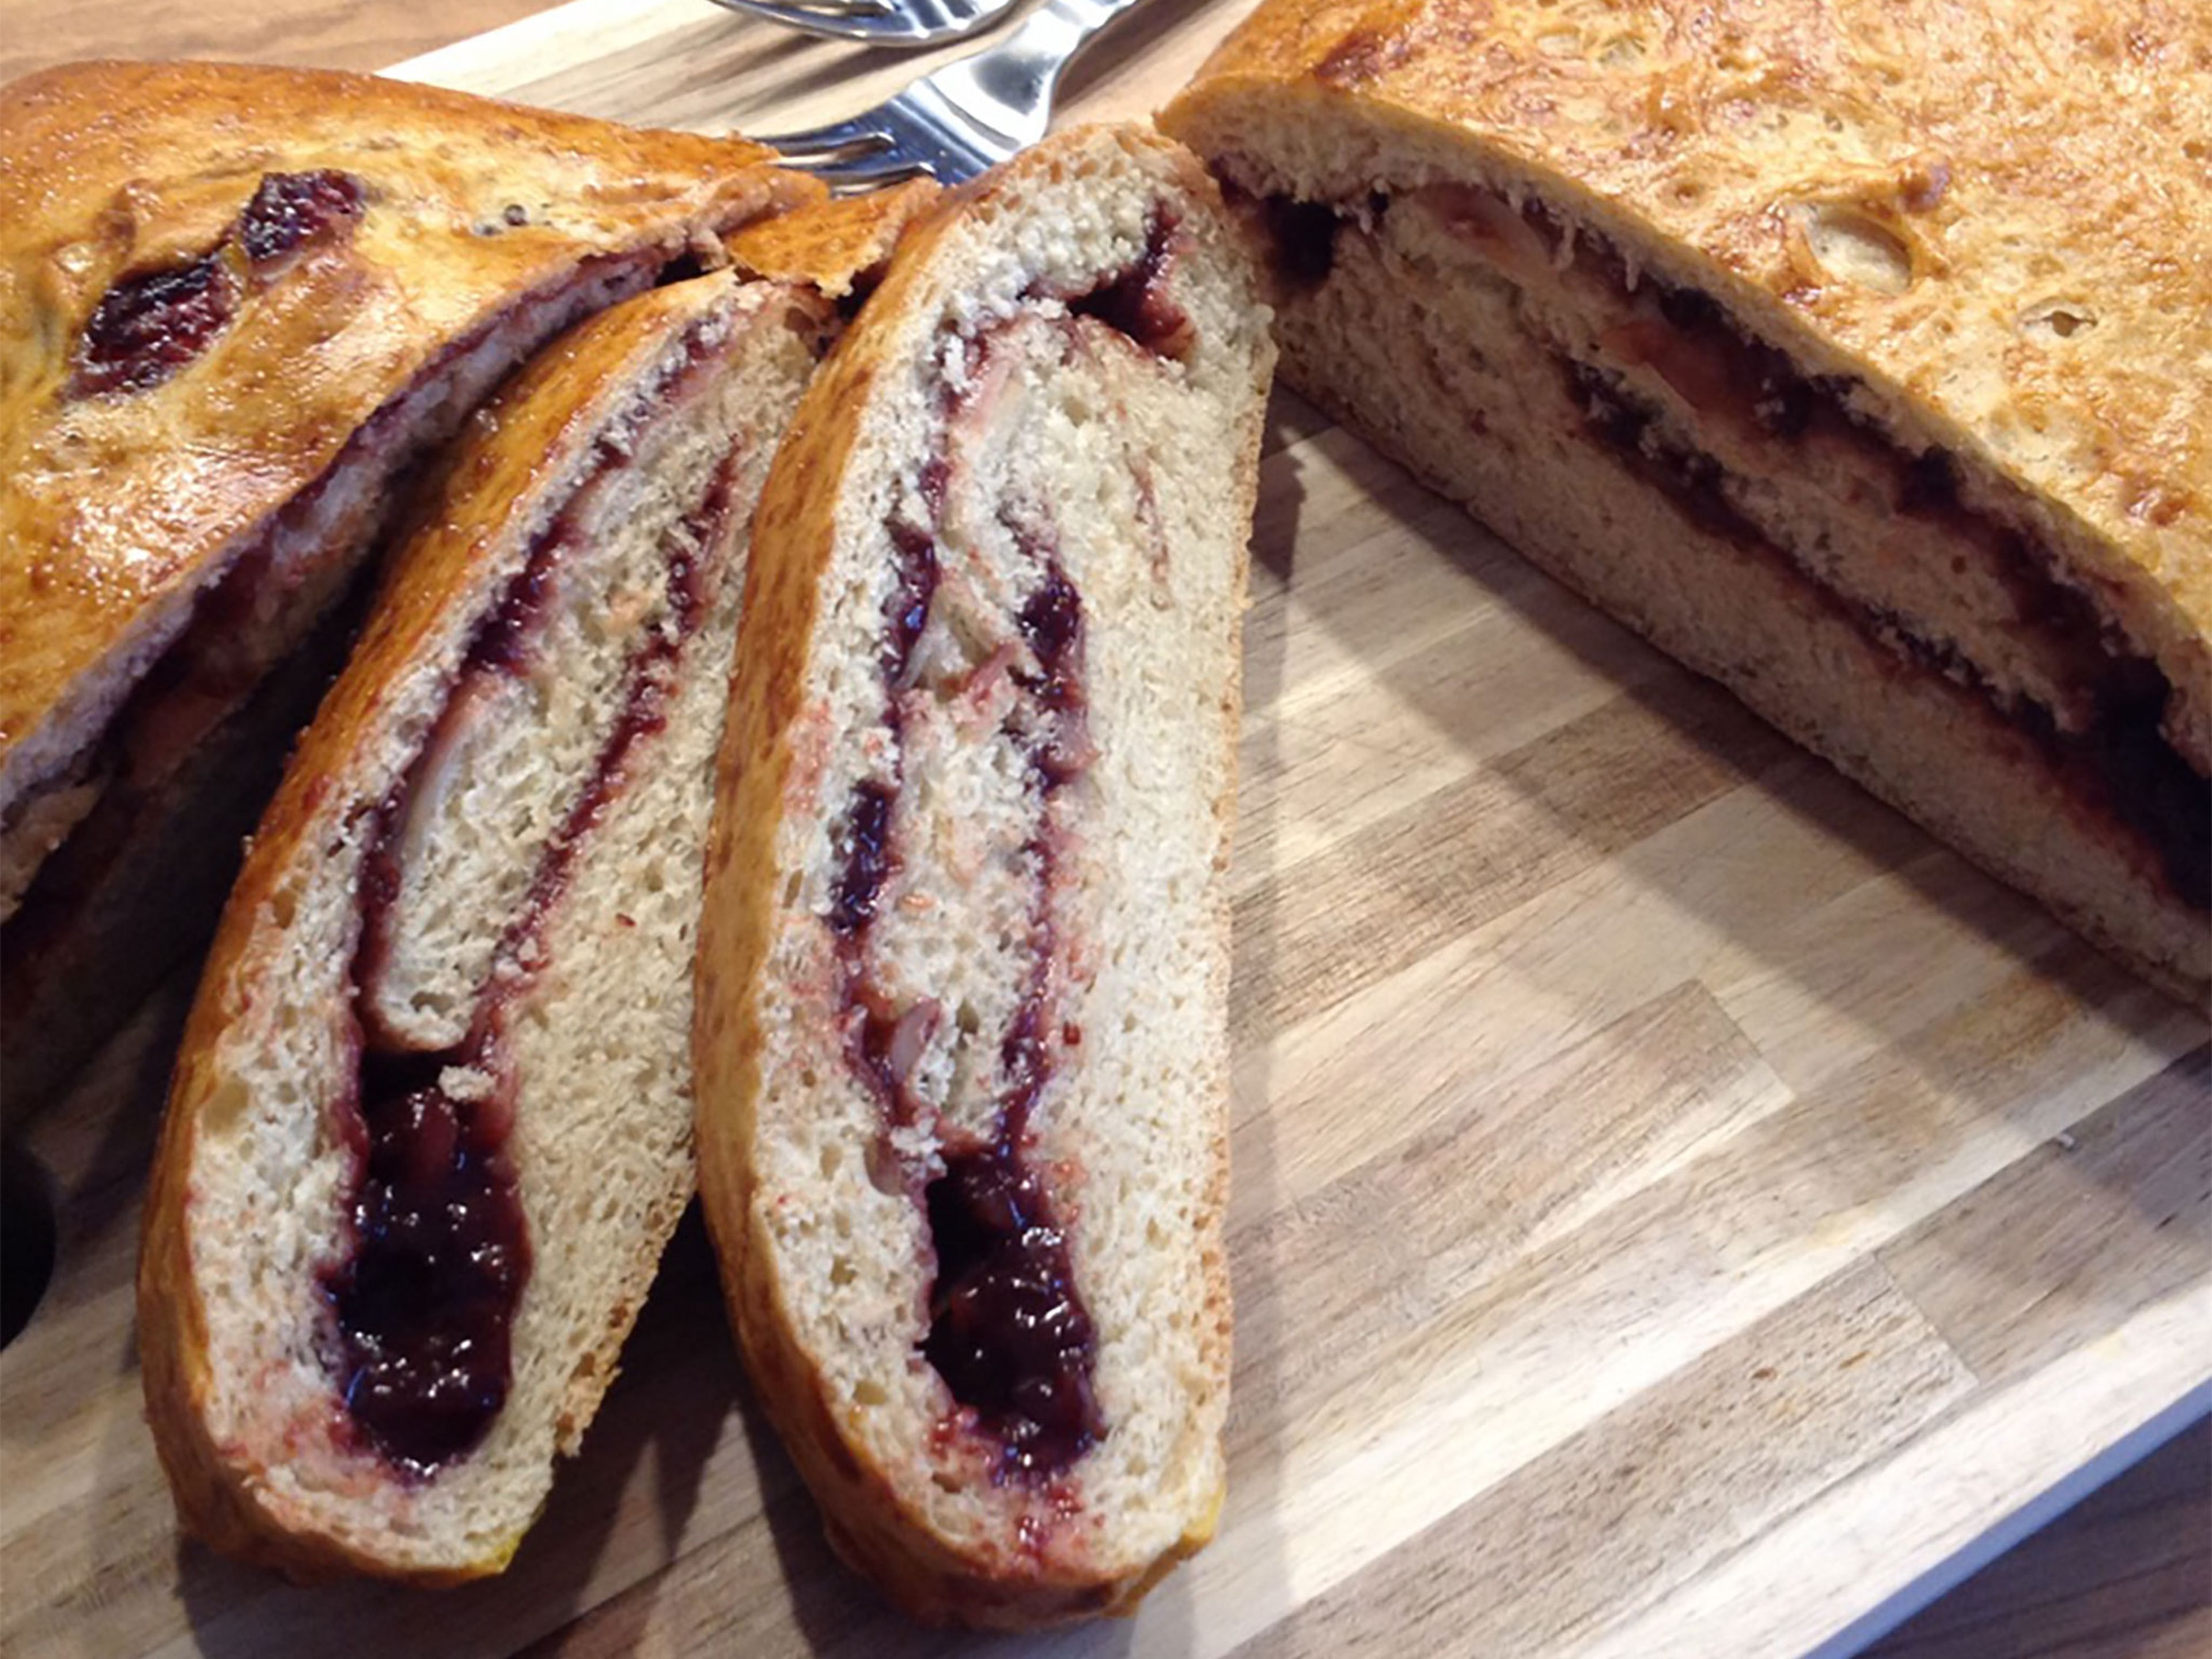 Set plum bread aside to cool, then serve.